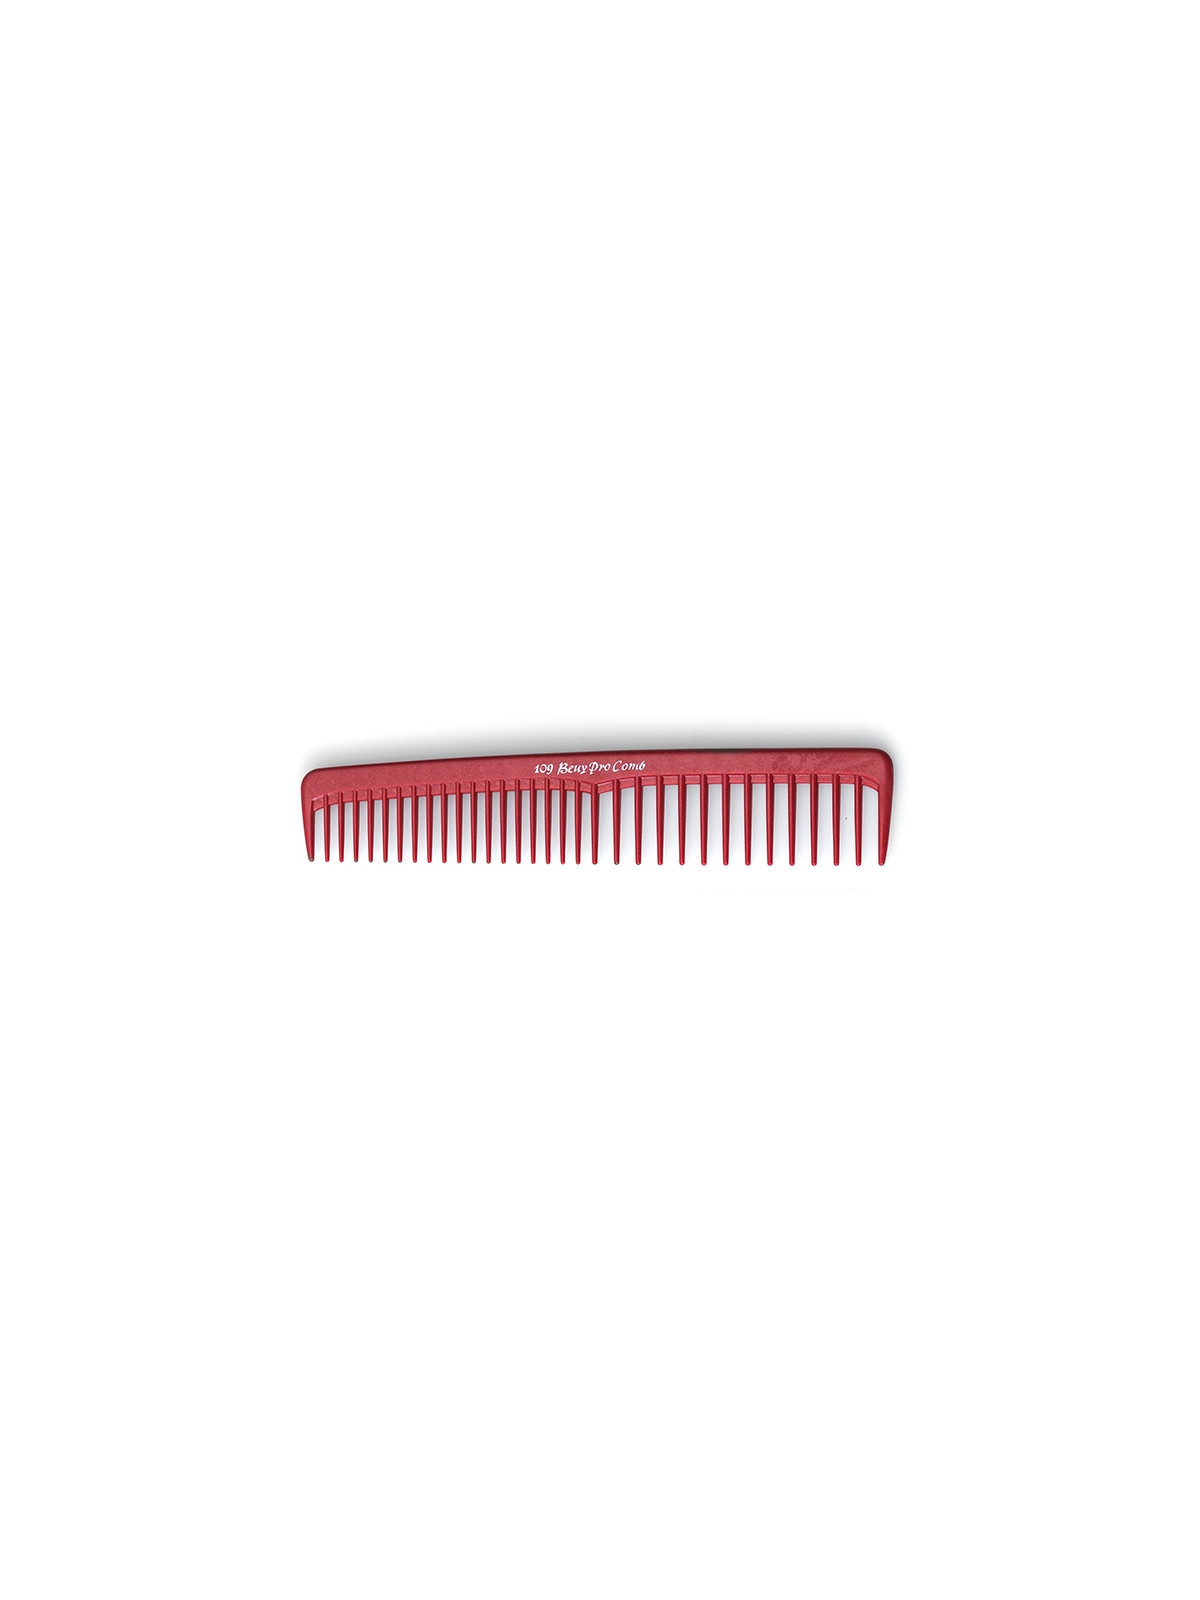 Beuy Pro 109 Cutting Comb